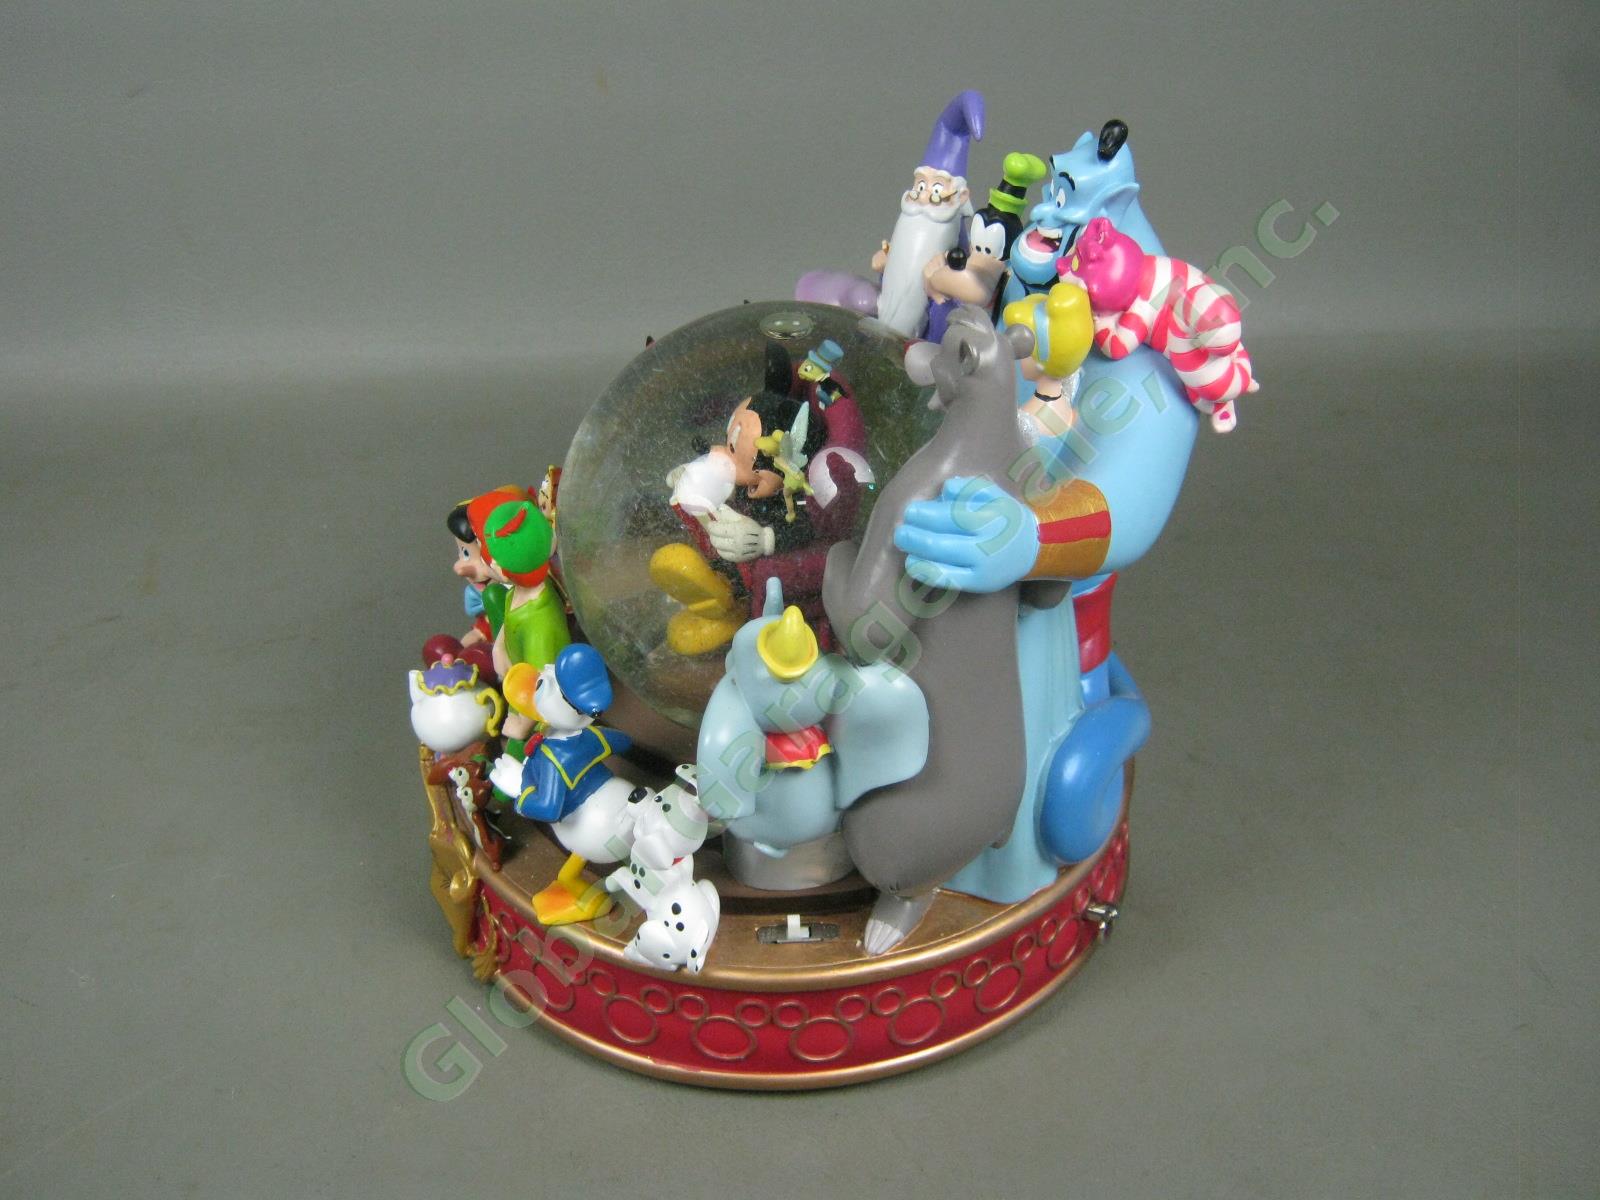 The Wonderful World Of Disney Store Musical Snow Globe When You Wish Upon A Star 2